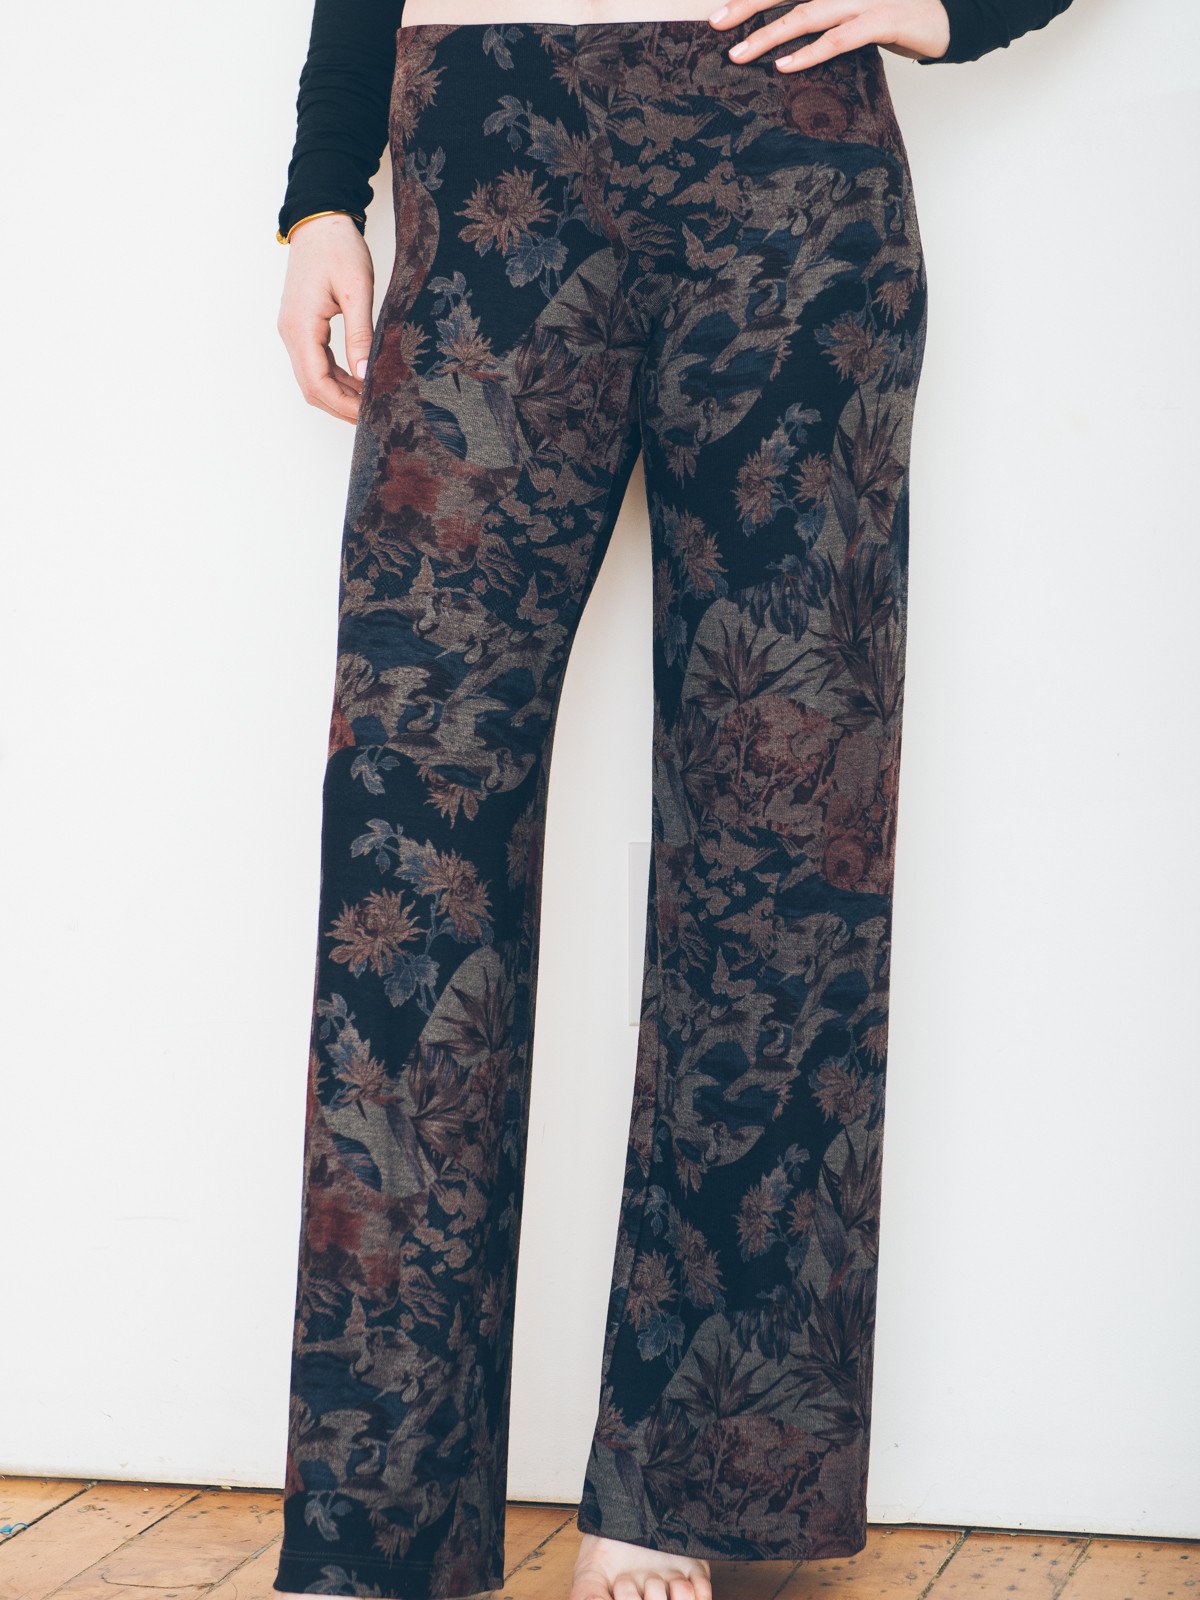 Pattern Pants for Spring / World Threads Traveler / Sustainable Fashion